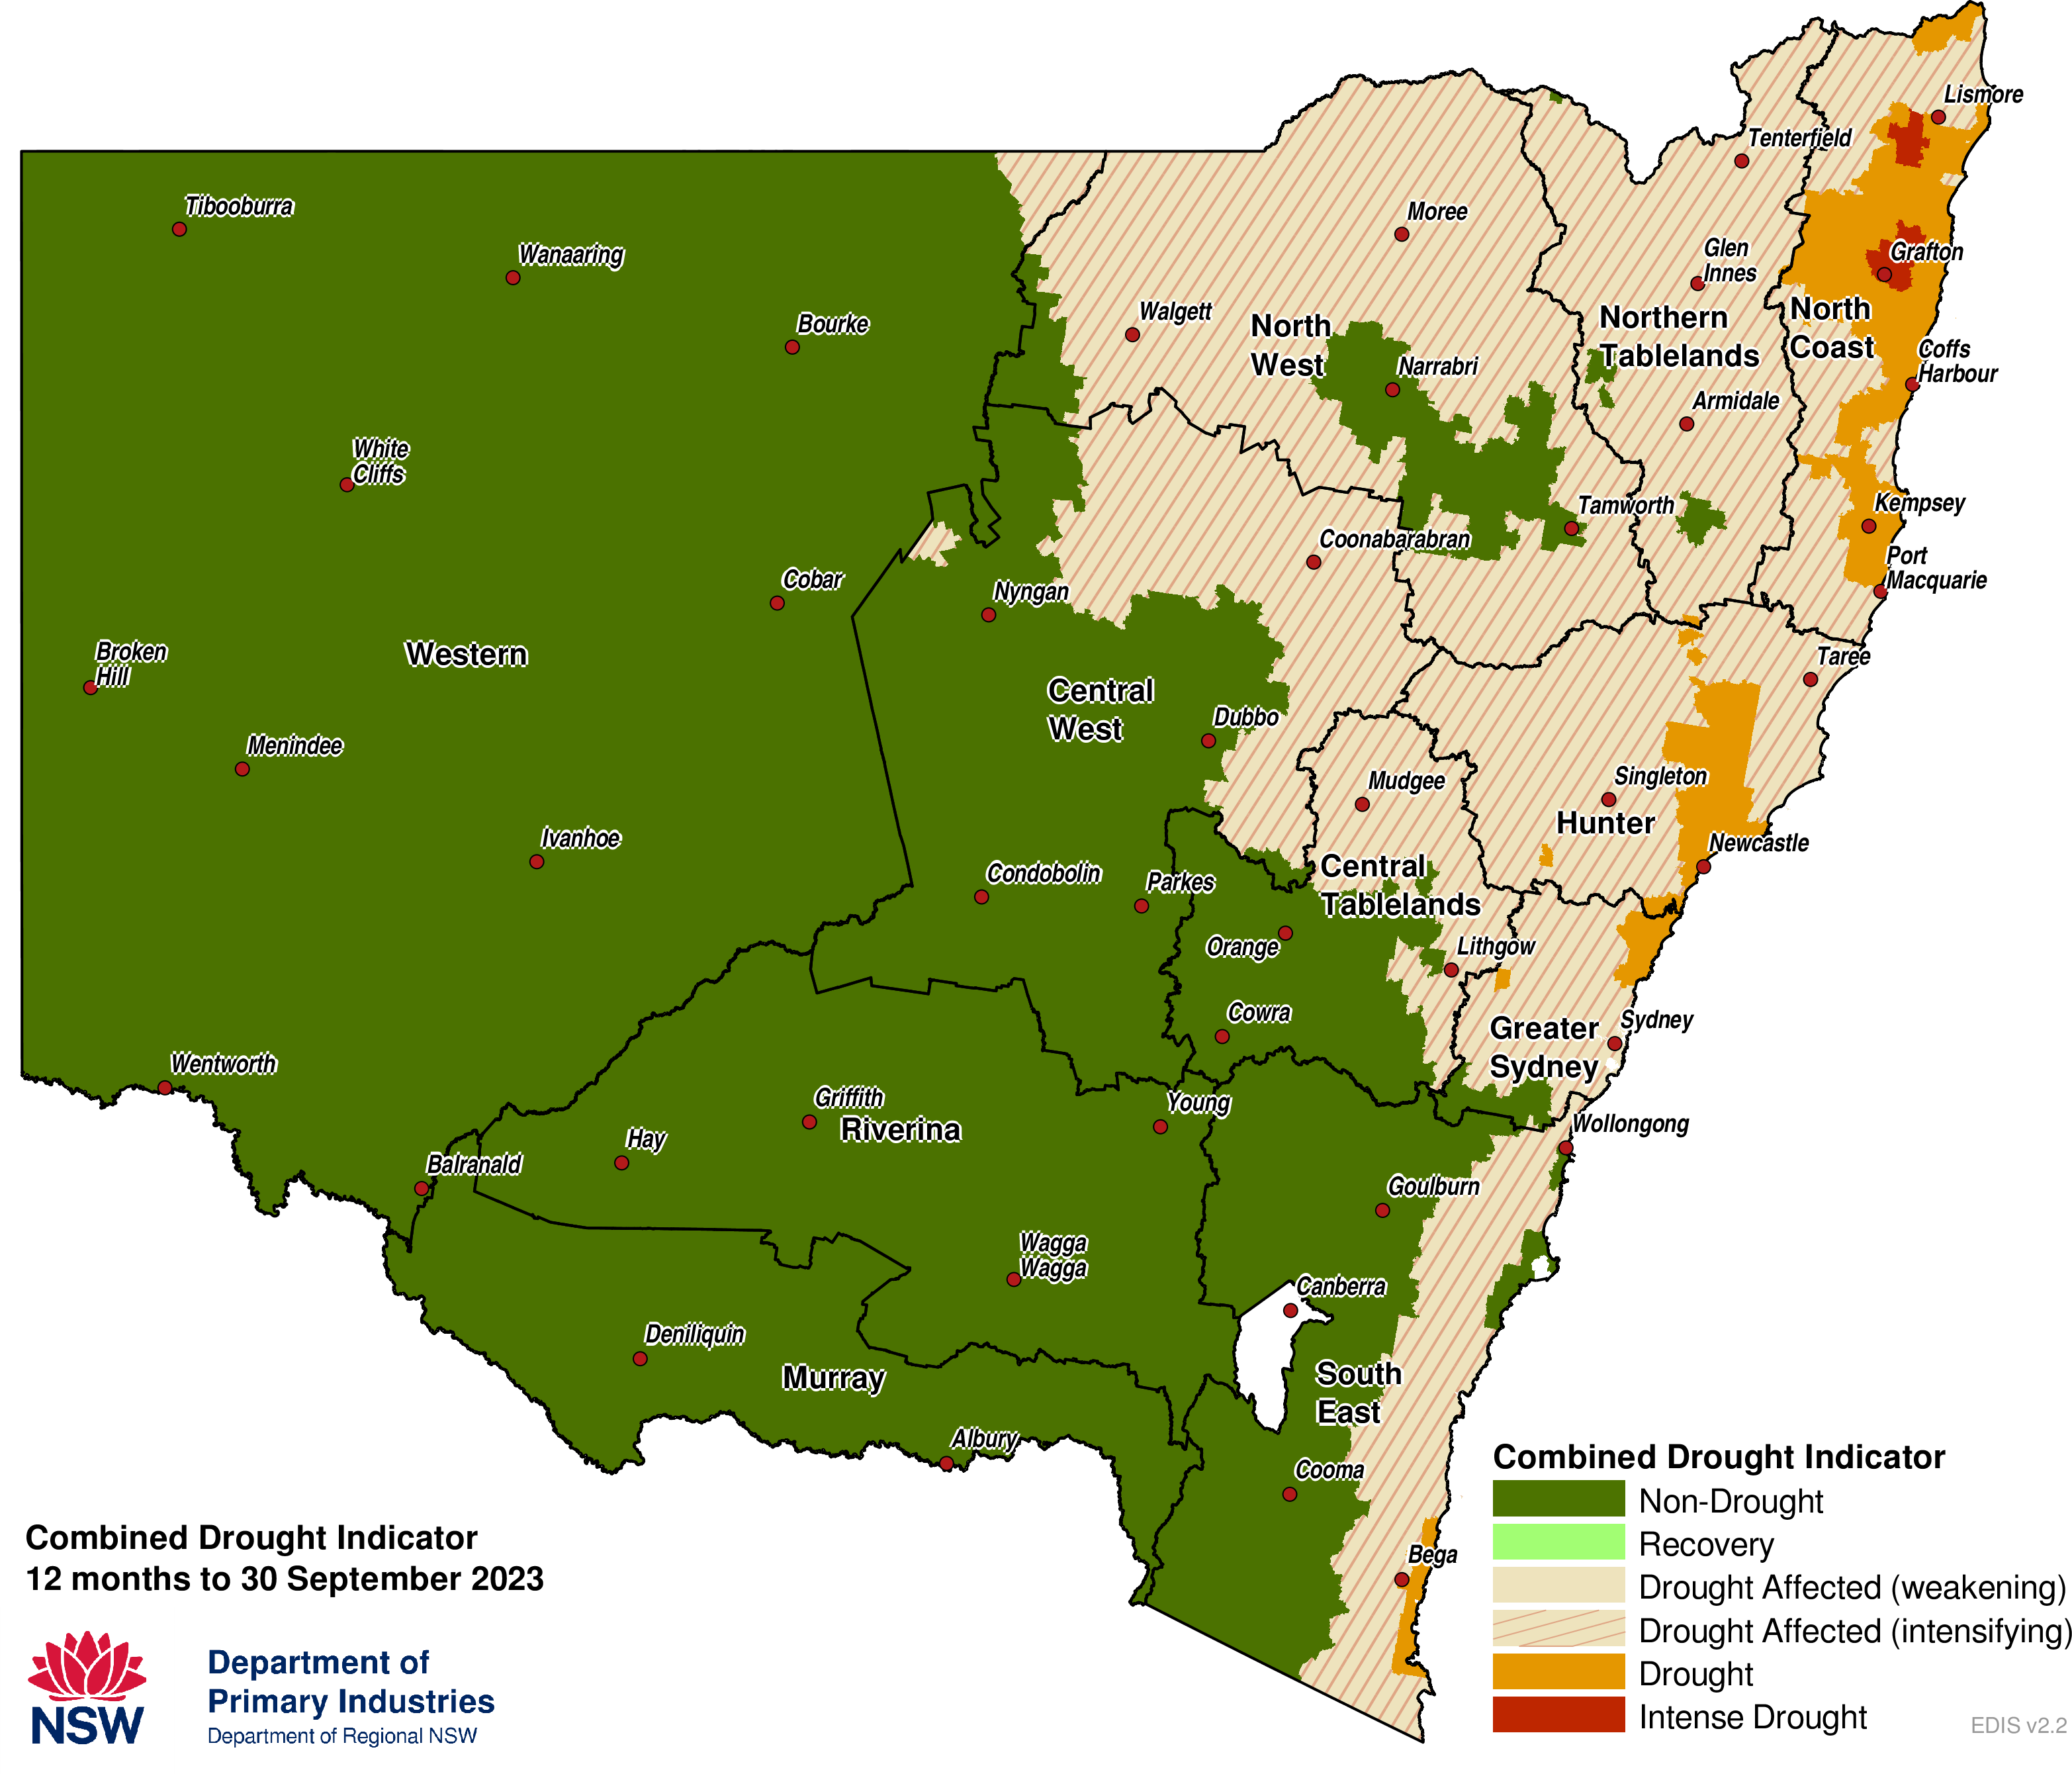 Figure 1. Verified NSW Combined Drought Indicator to 30 September 2023